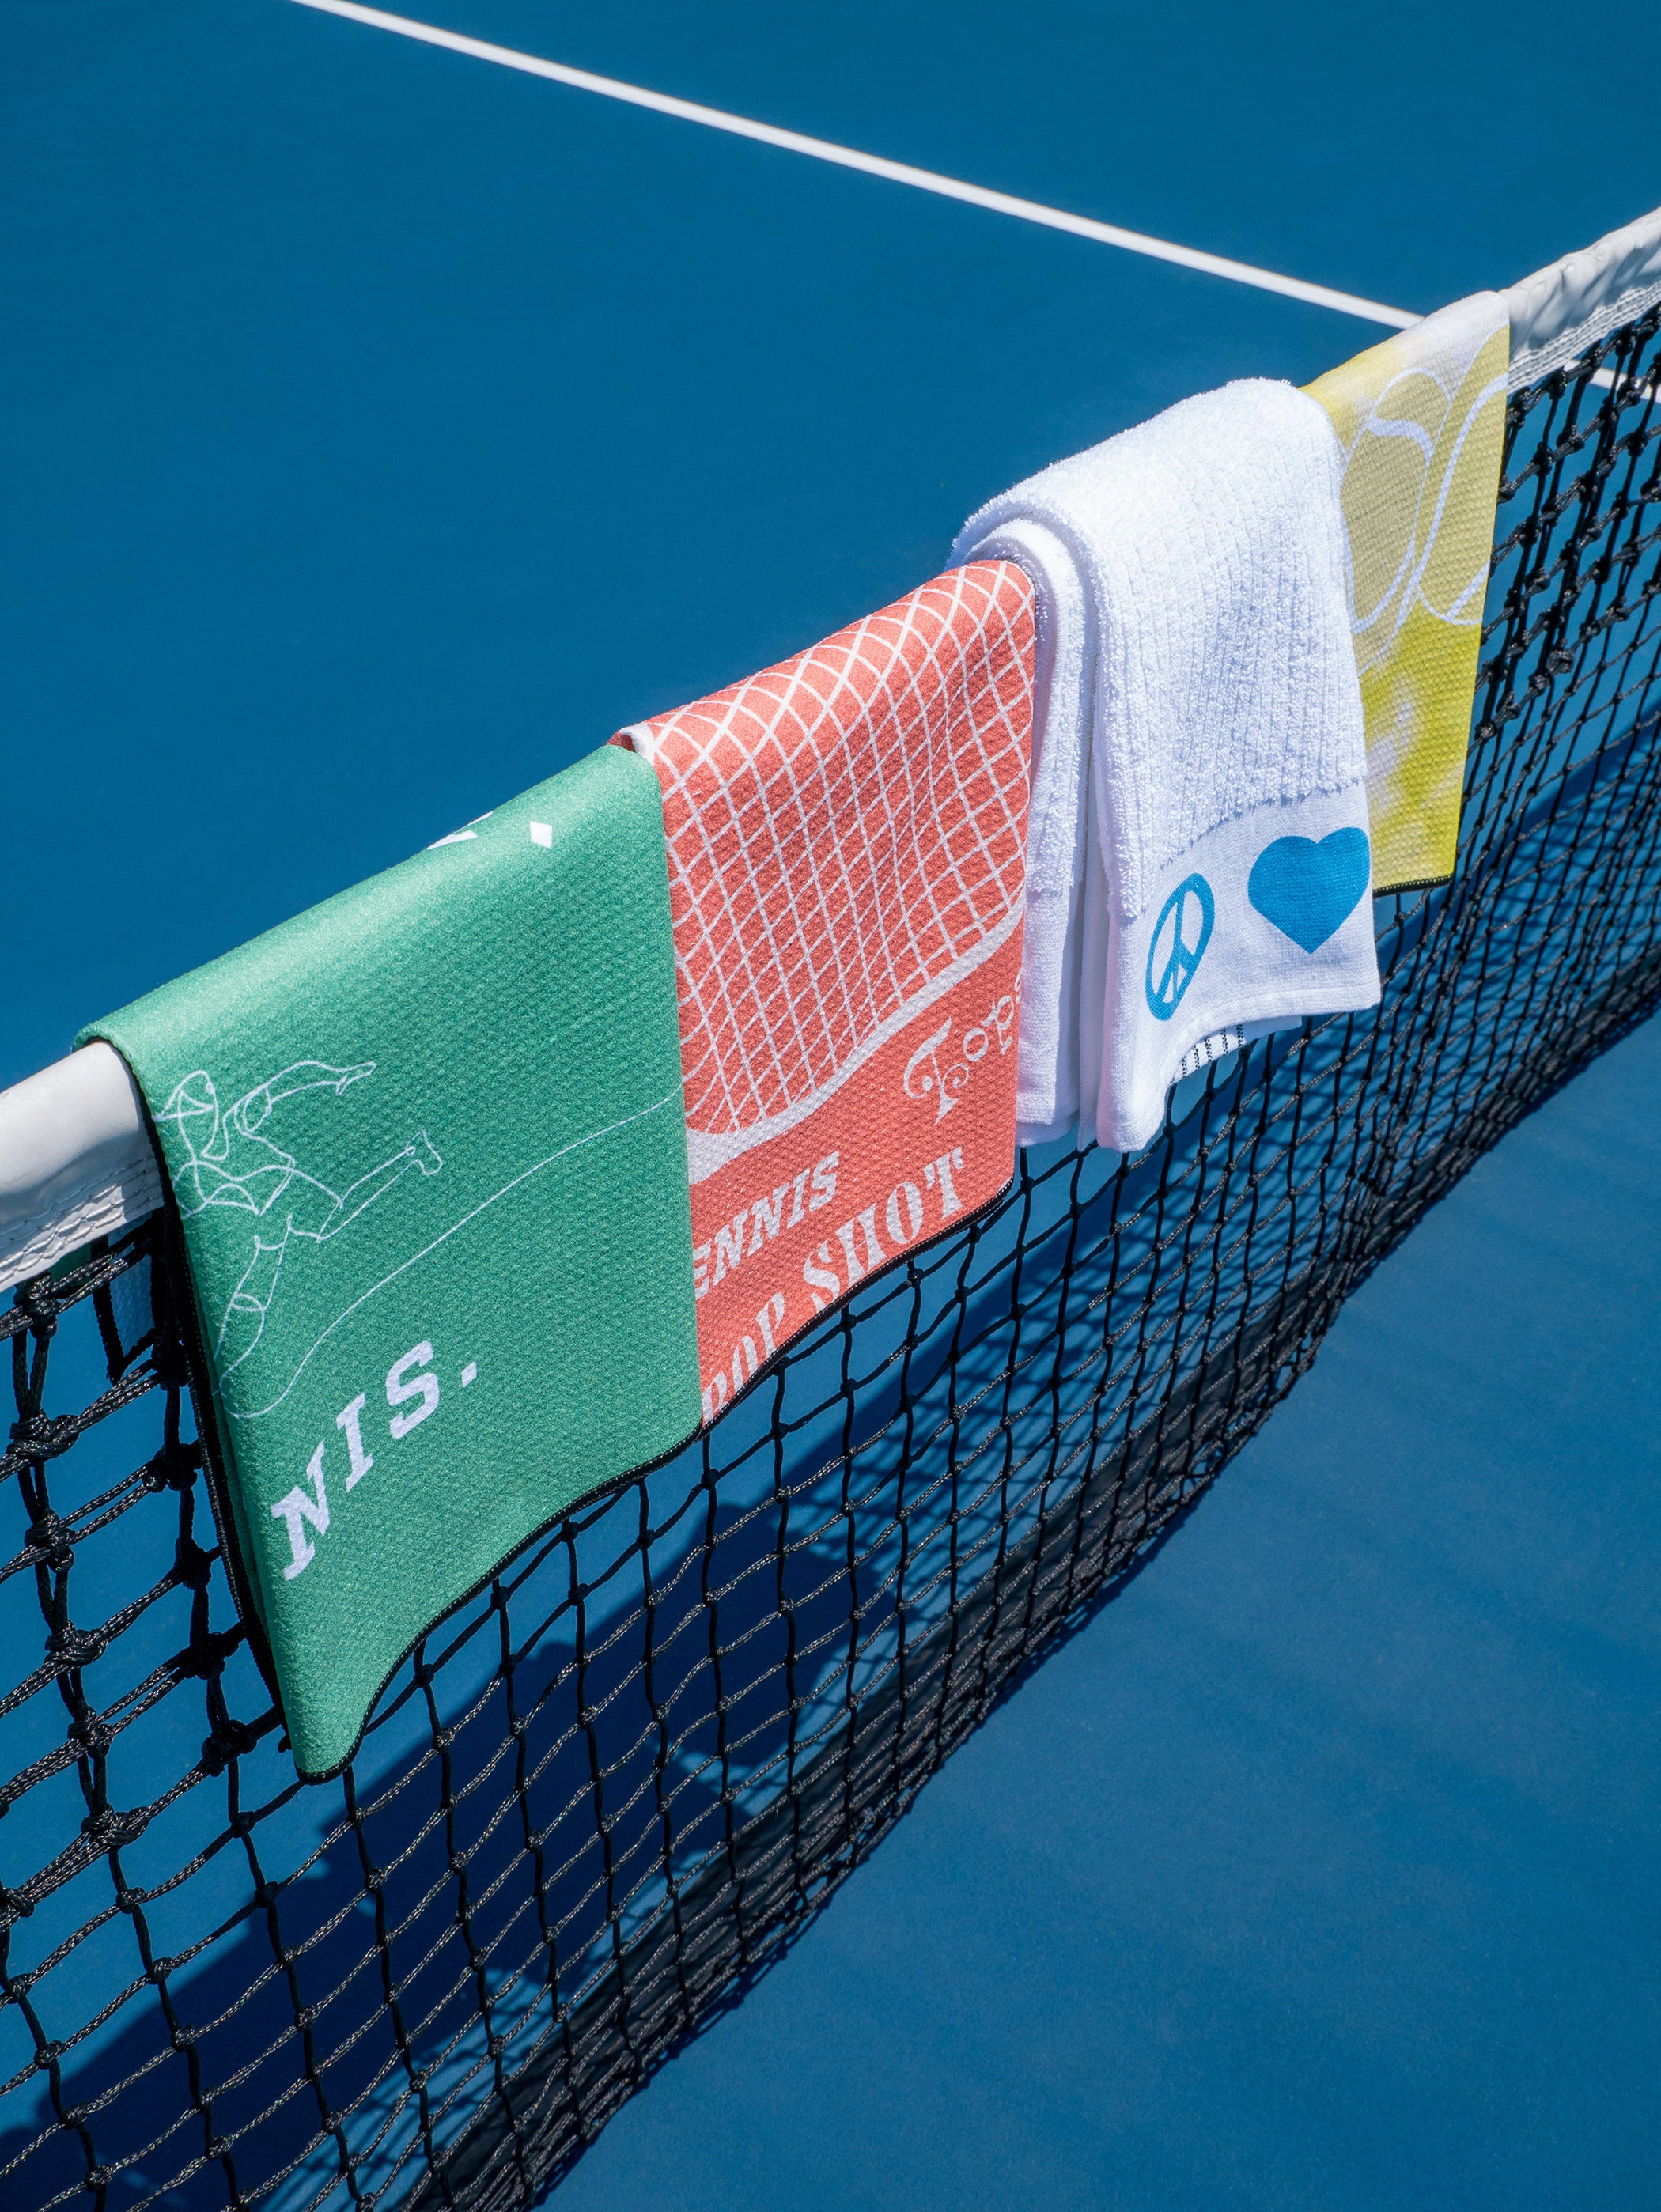 4 colorful towels hanging over tennis net, blue tennis court in background